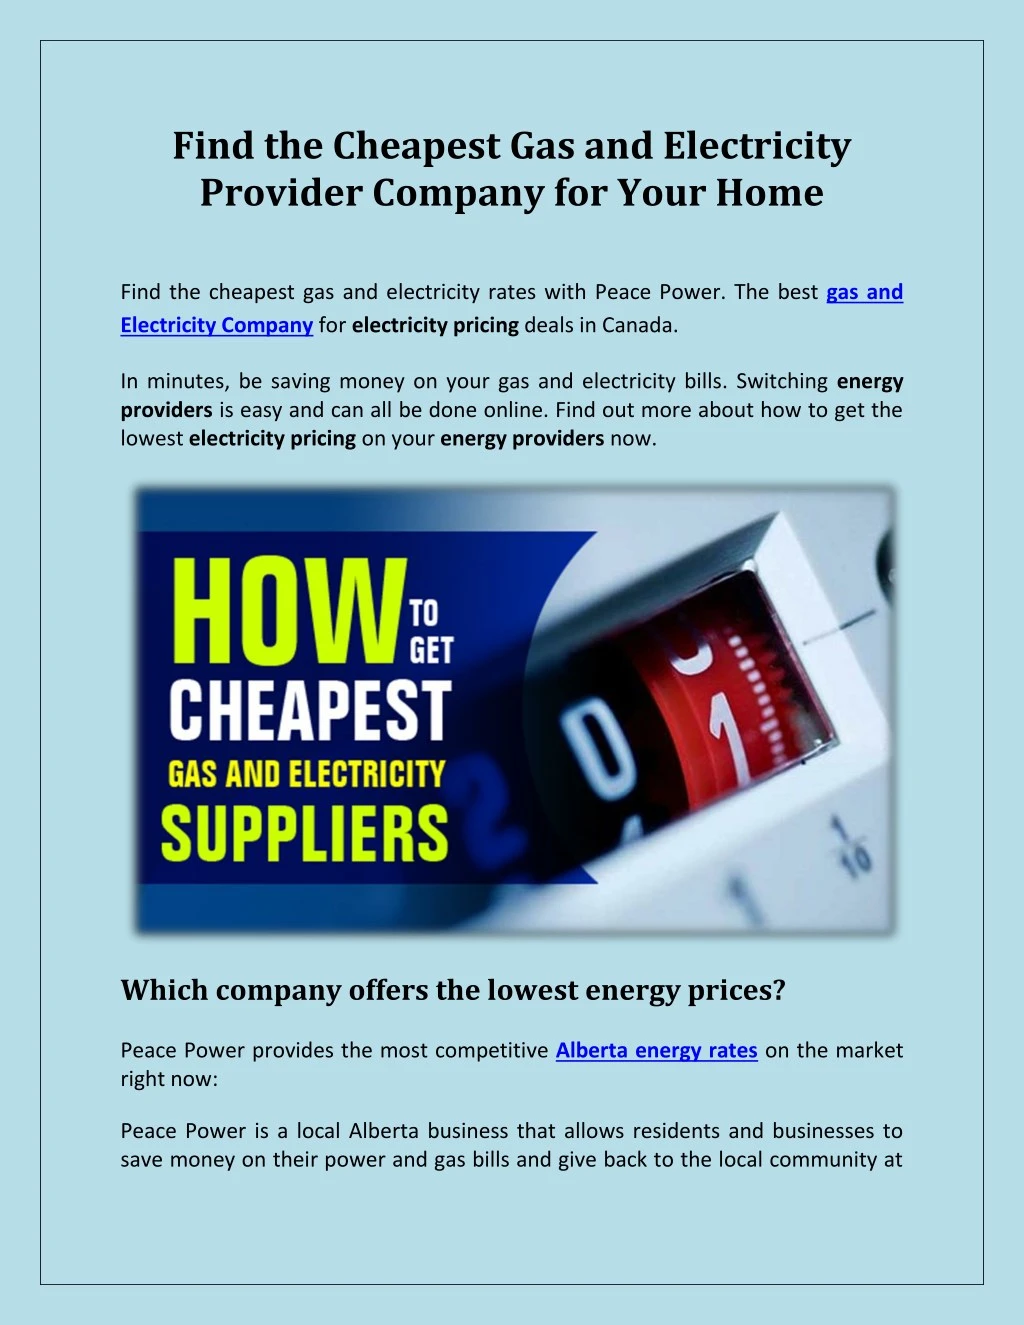 cheapest combined gas and electric supplier